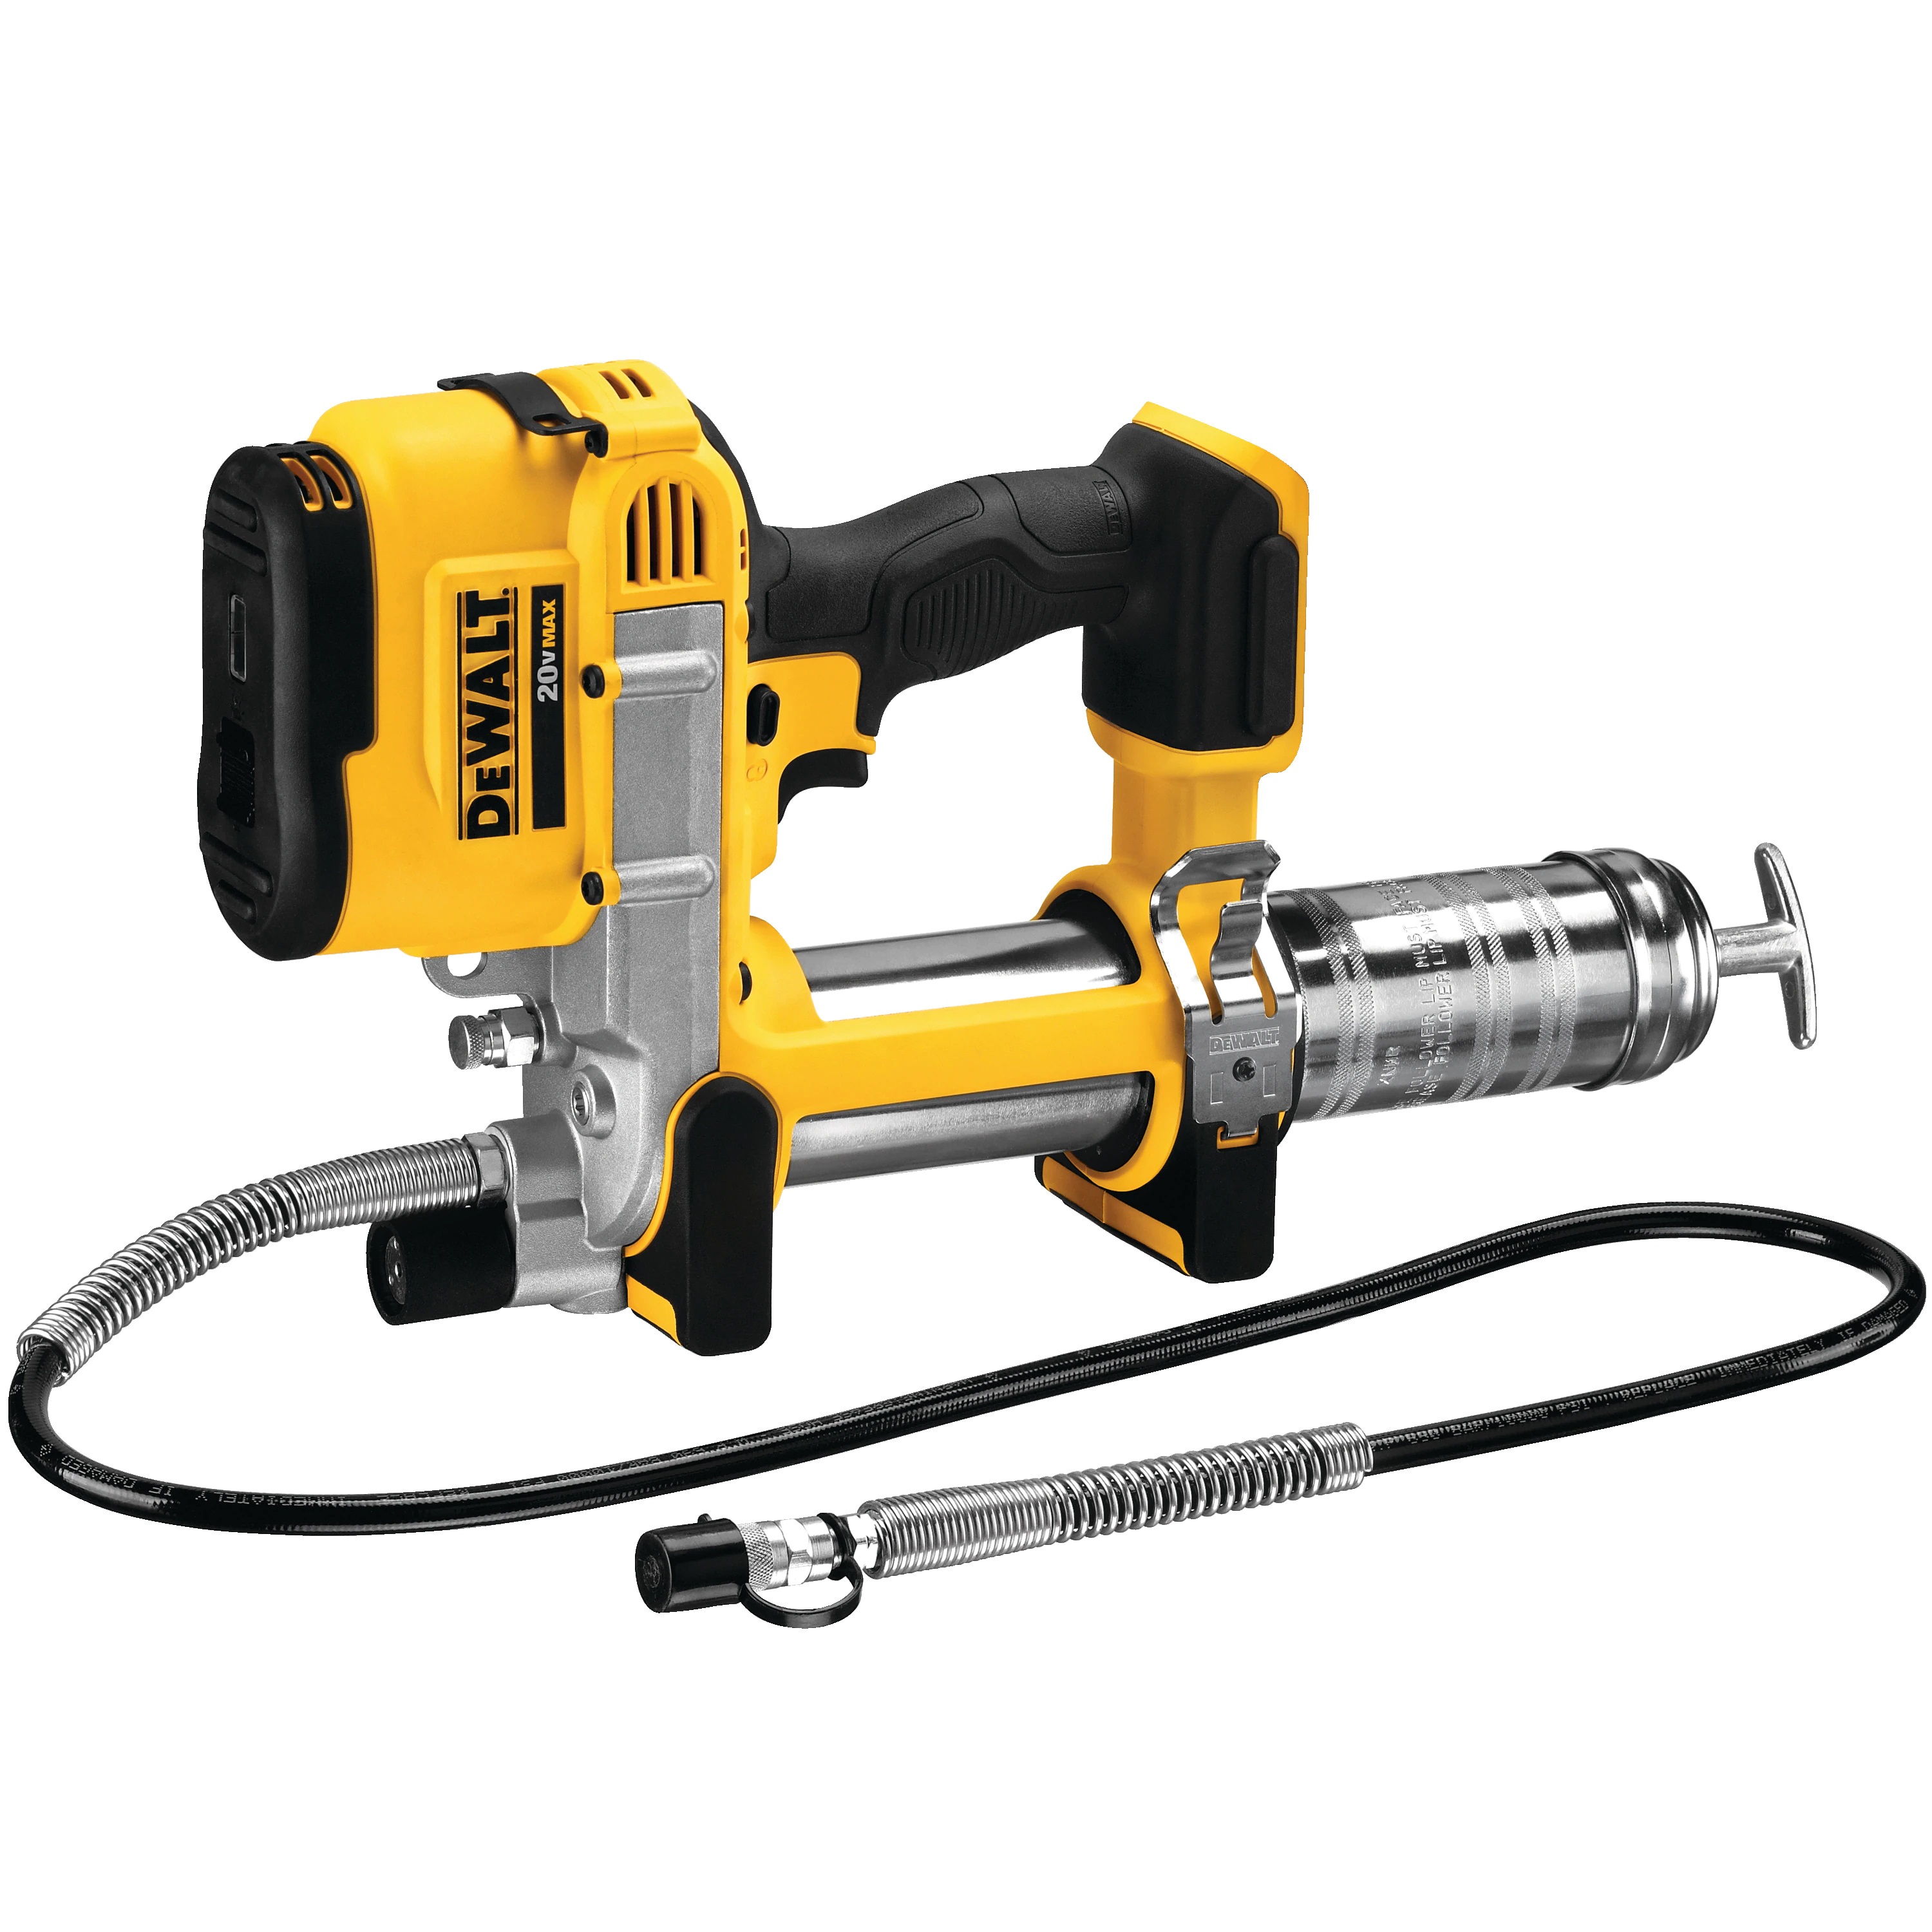 Grease Gun - 20V MAX* (TOOL ONLY) - Fuels, Oils & Lubricants